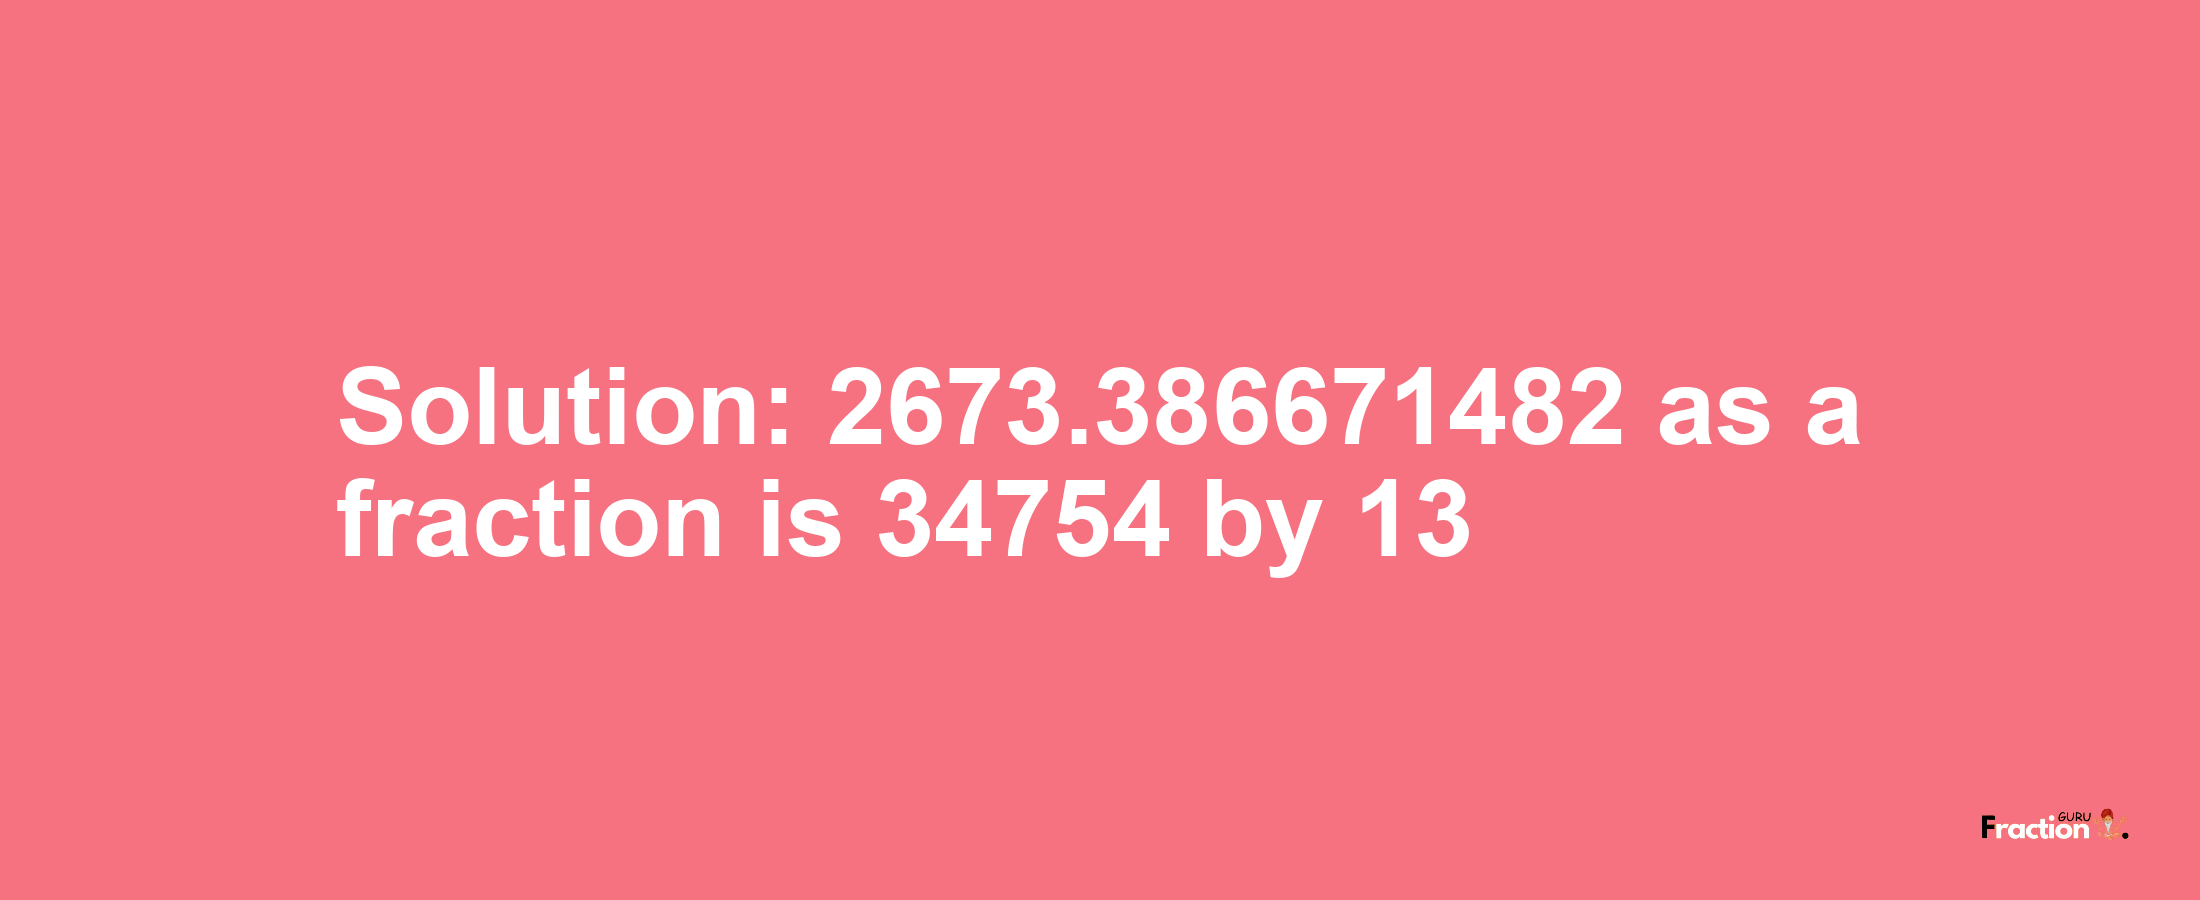 Solution:2673.386671482 as a fraction is 34754/13